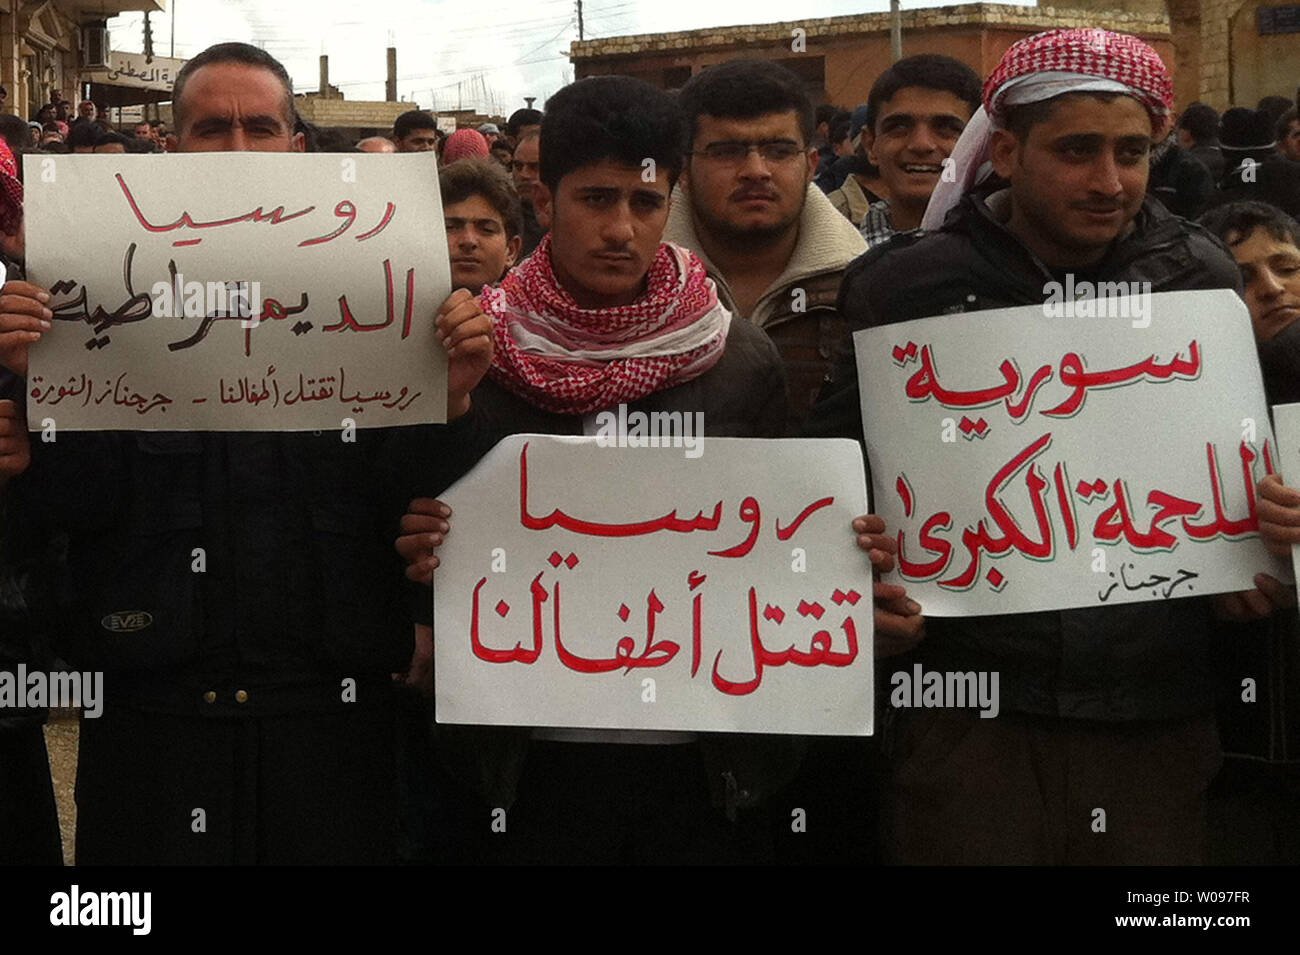 Syrian protesters hold banners that read in Arabic (Russia kills our children)  during a protest against Syria's President Bashar al-Assad in Jrbanaz near Idlib in Syria on February 11, 2012.    UPI Stock Photo